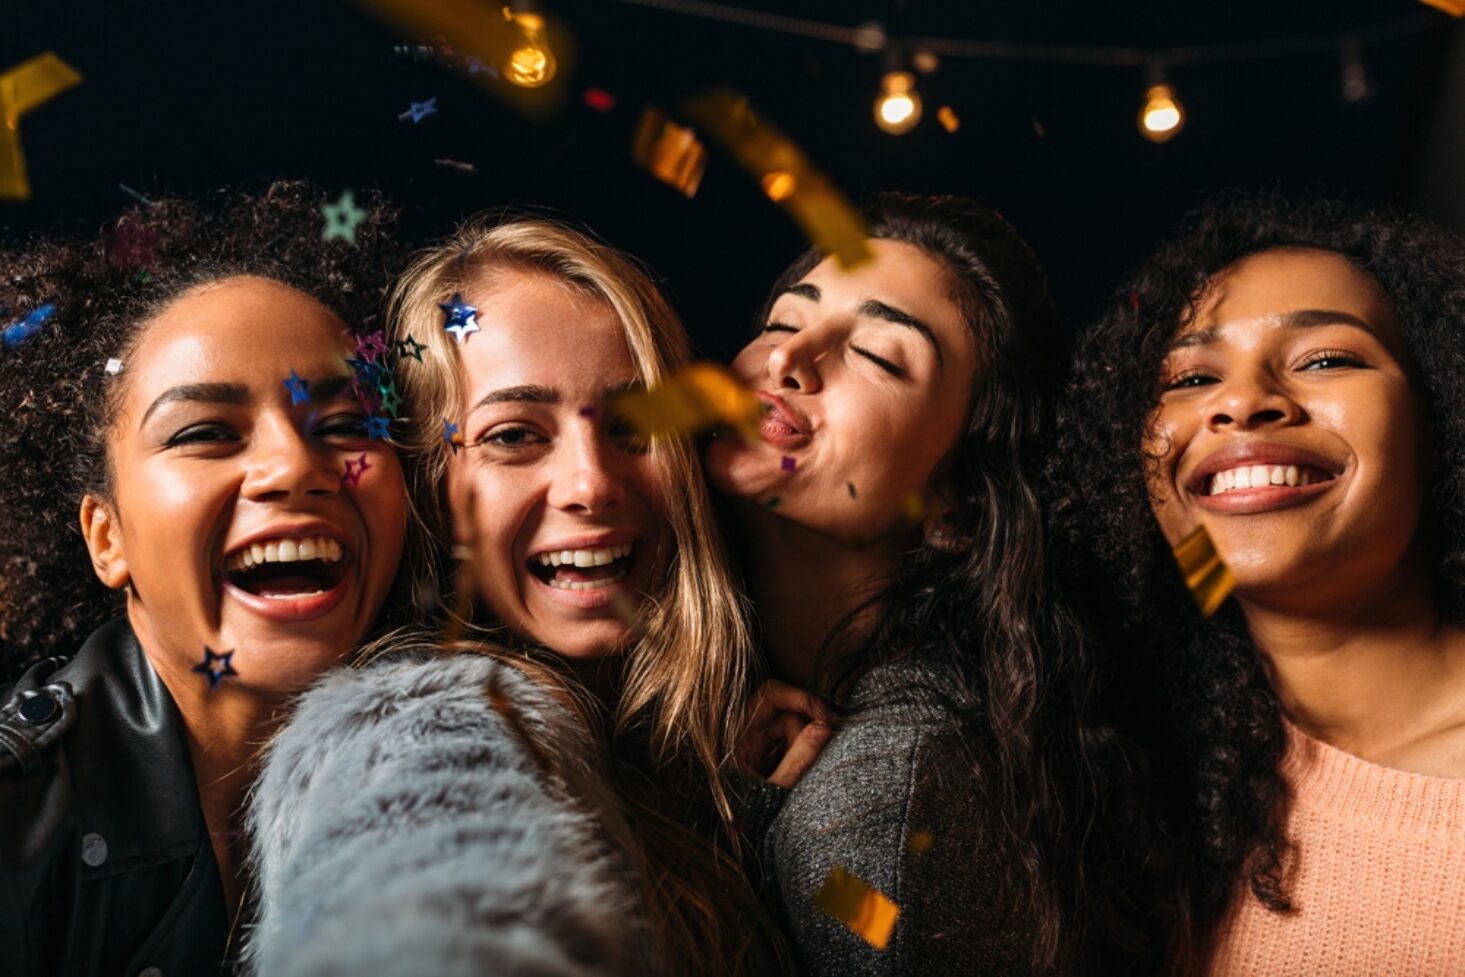 How to Plan a Night Out That Everyone Will Enjoy